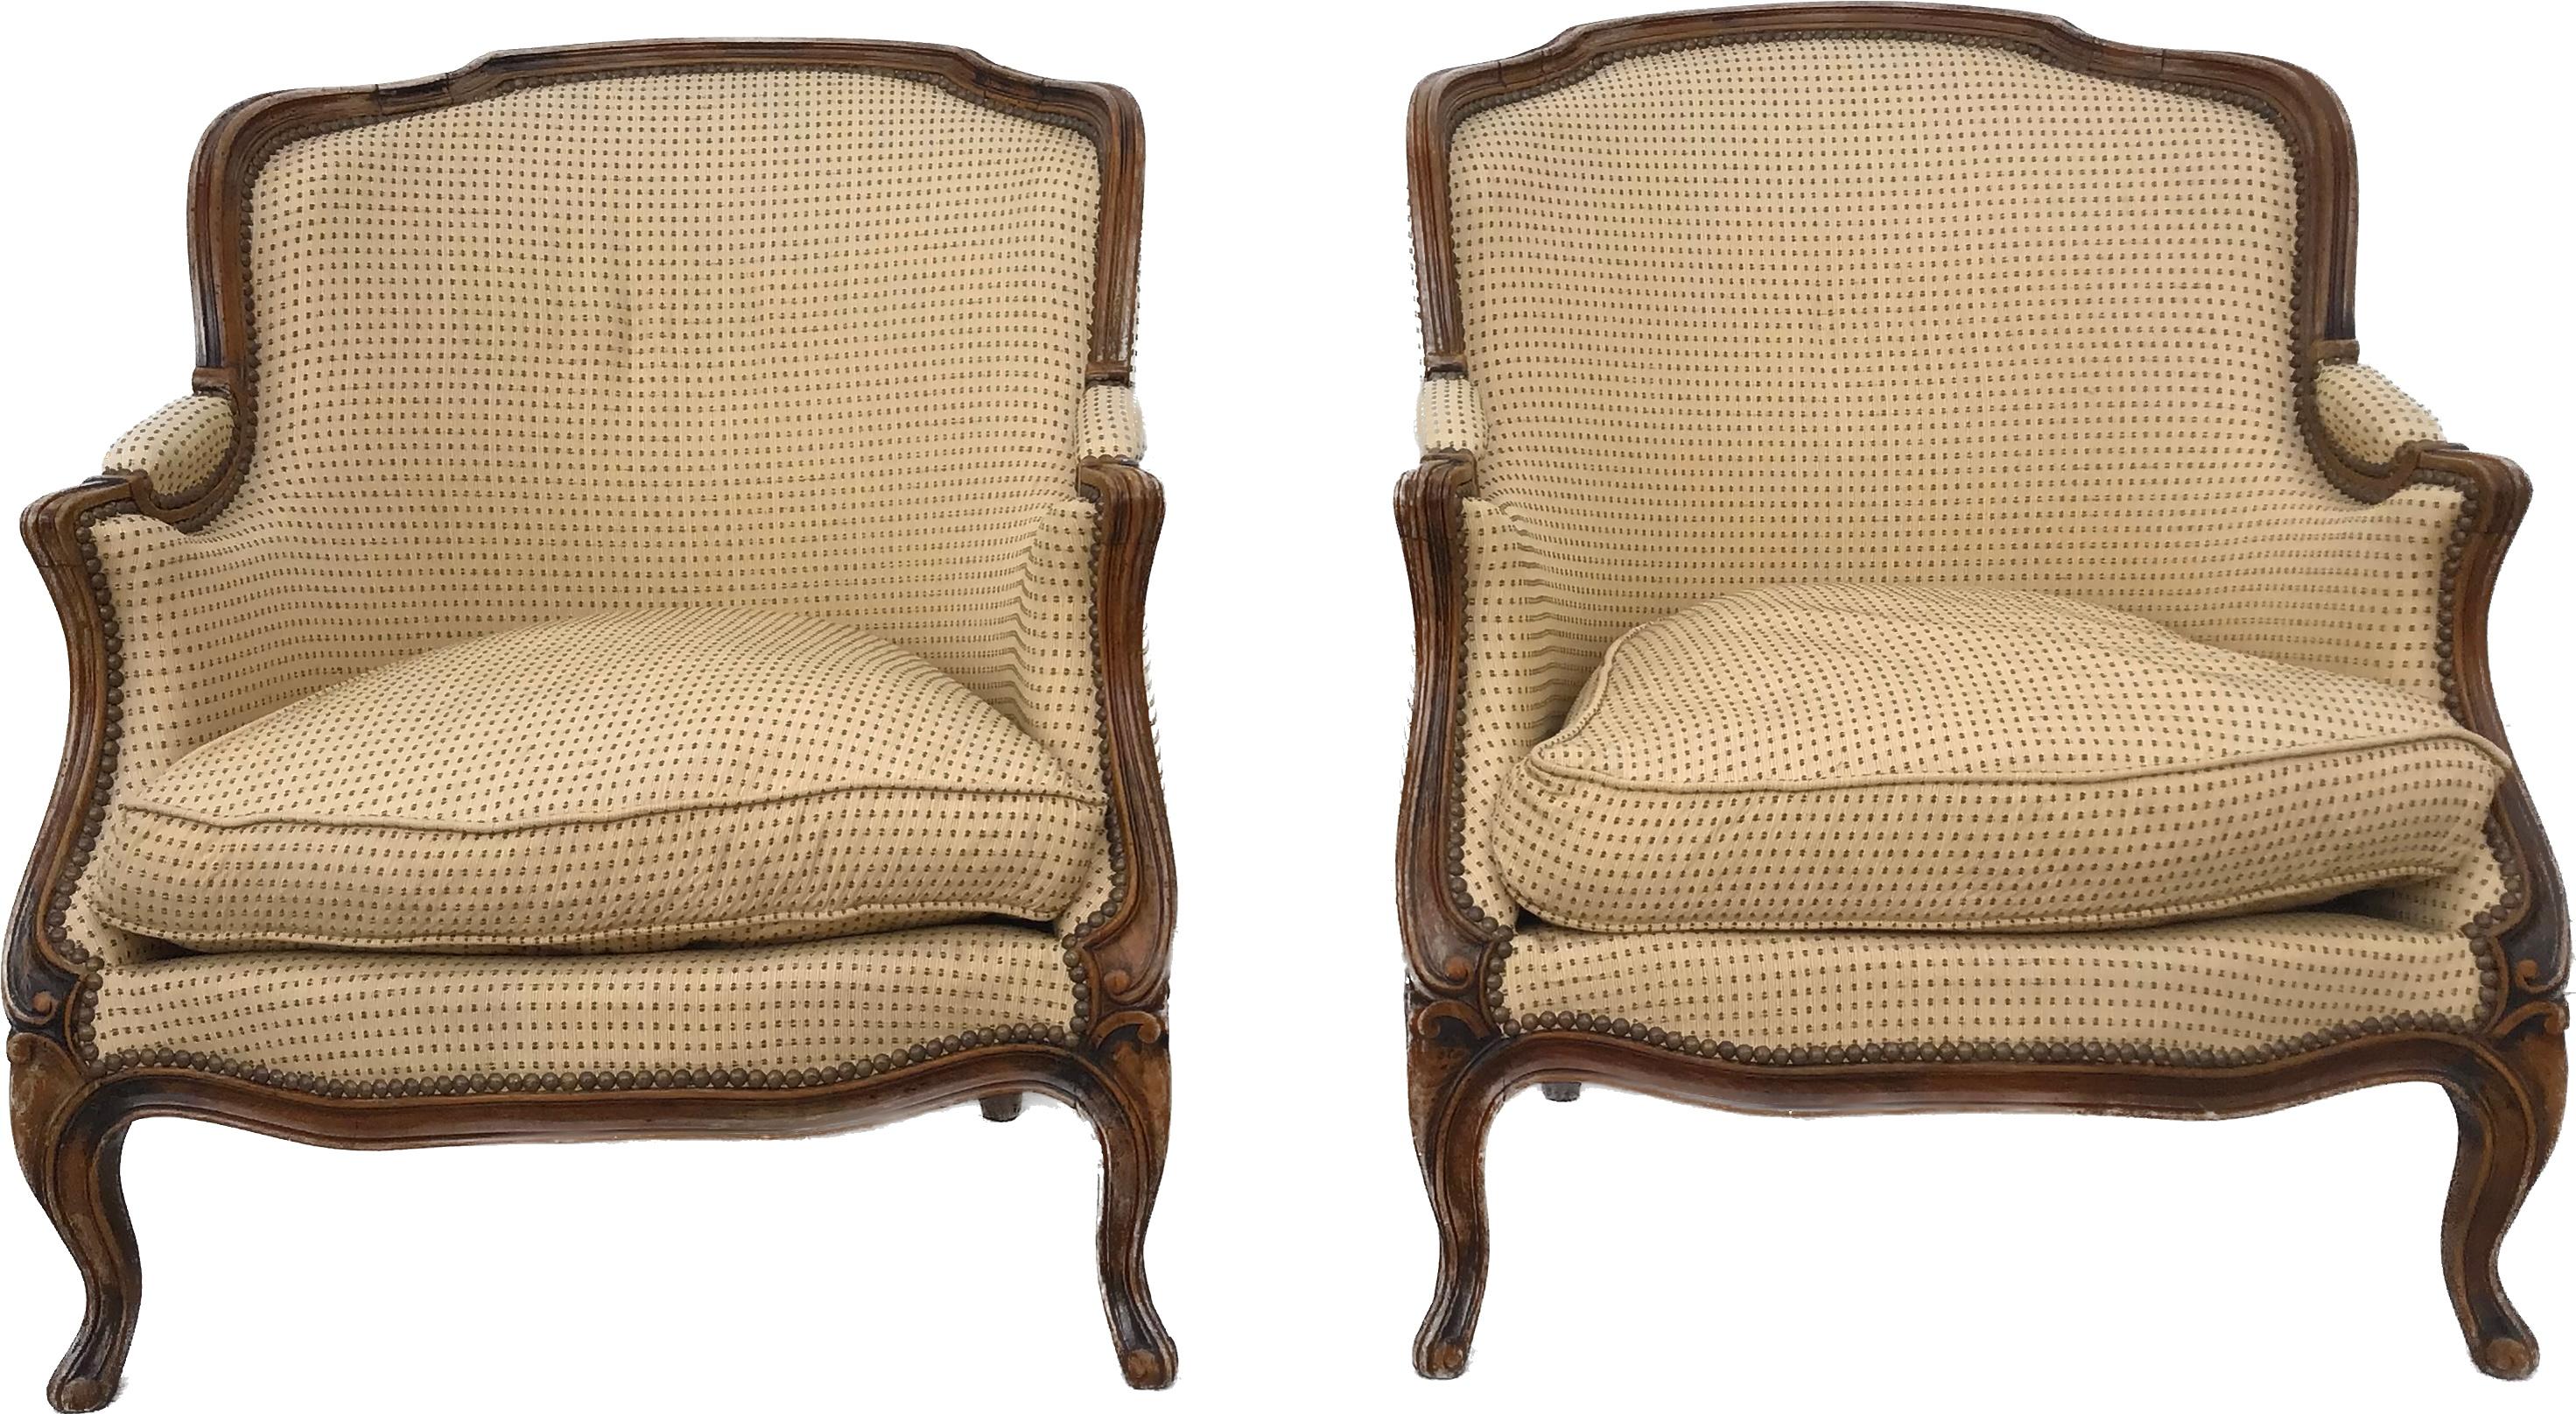 Elegant French bergeres with carved walnut frames. Crisp carved frames. Solid sturdy pair of Bergere Chairs. These are in very good condition with minimal wear to the frames or the upholstery. 